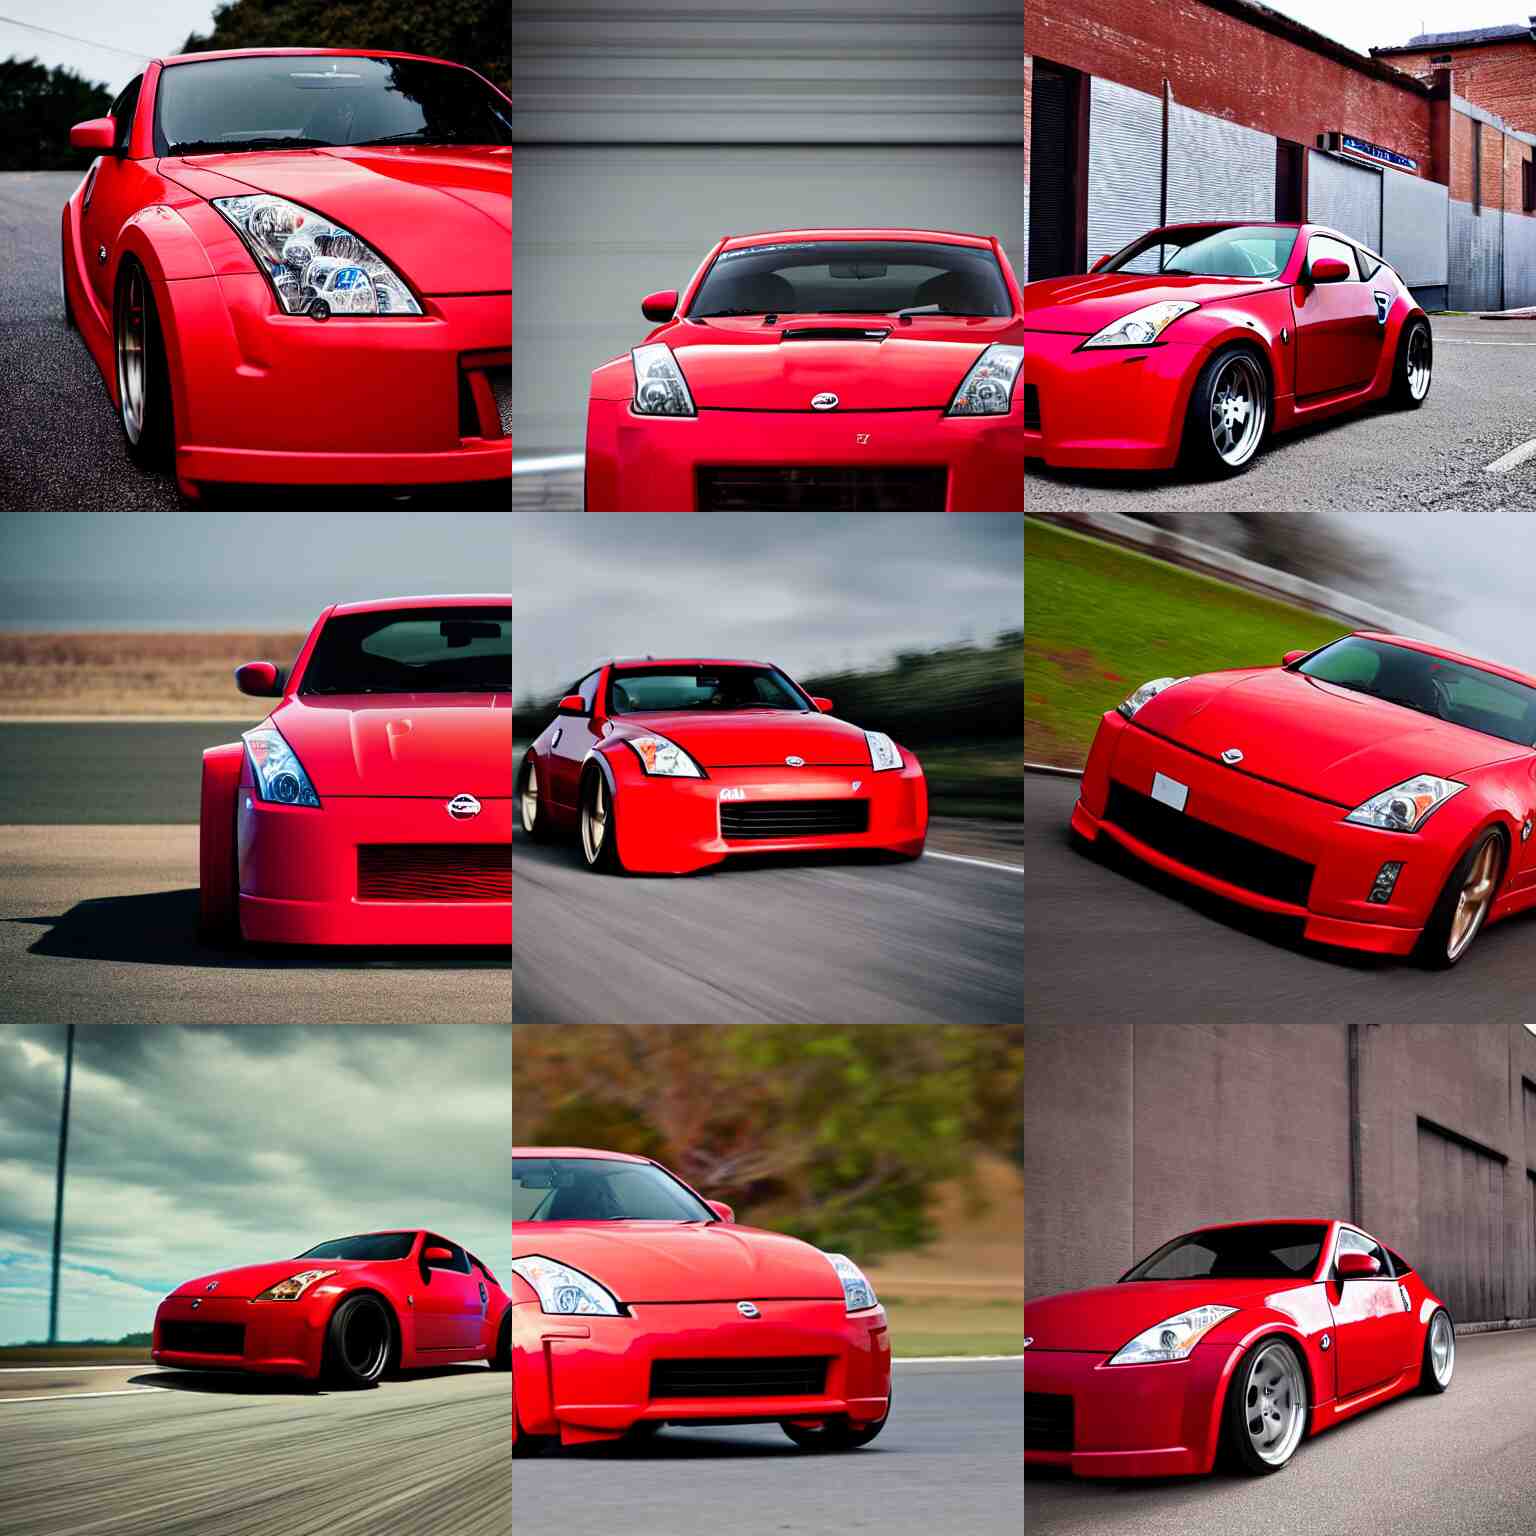 How Using An API For Categorizing Car Images Can Make You More Productive